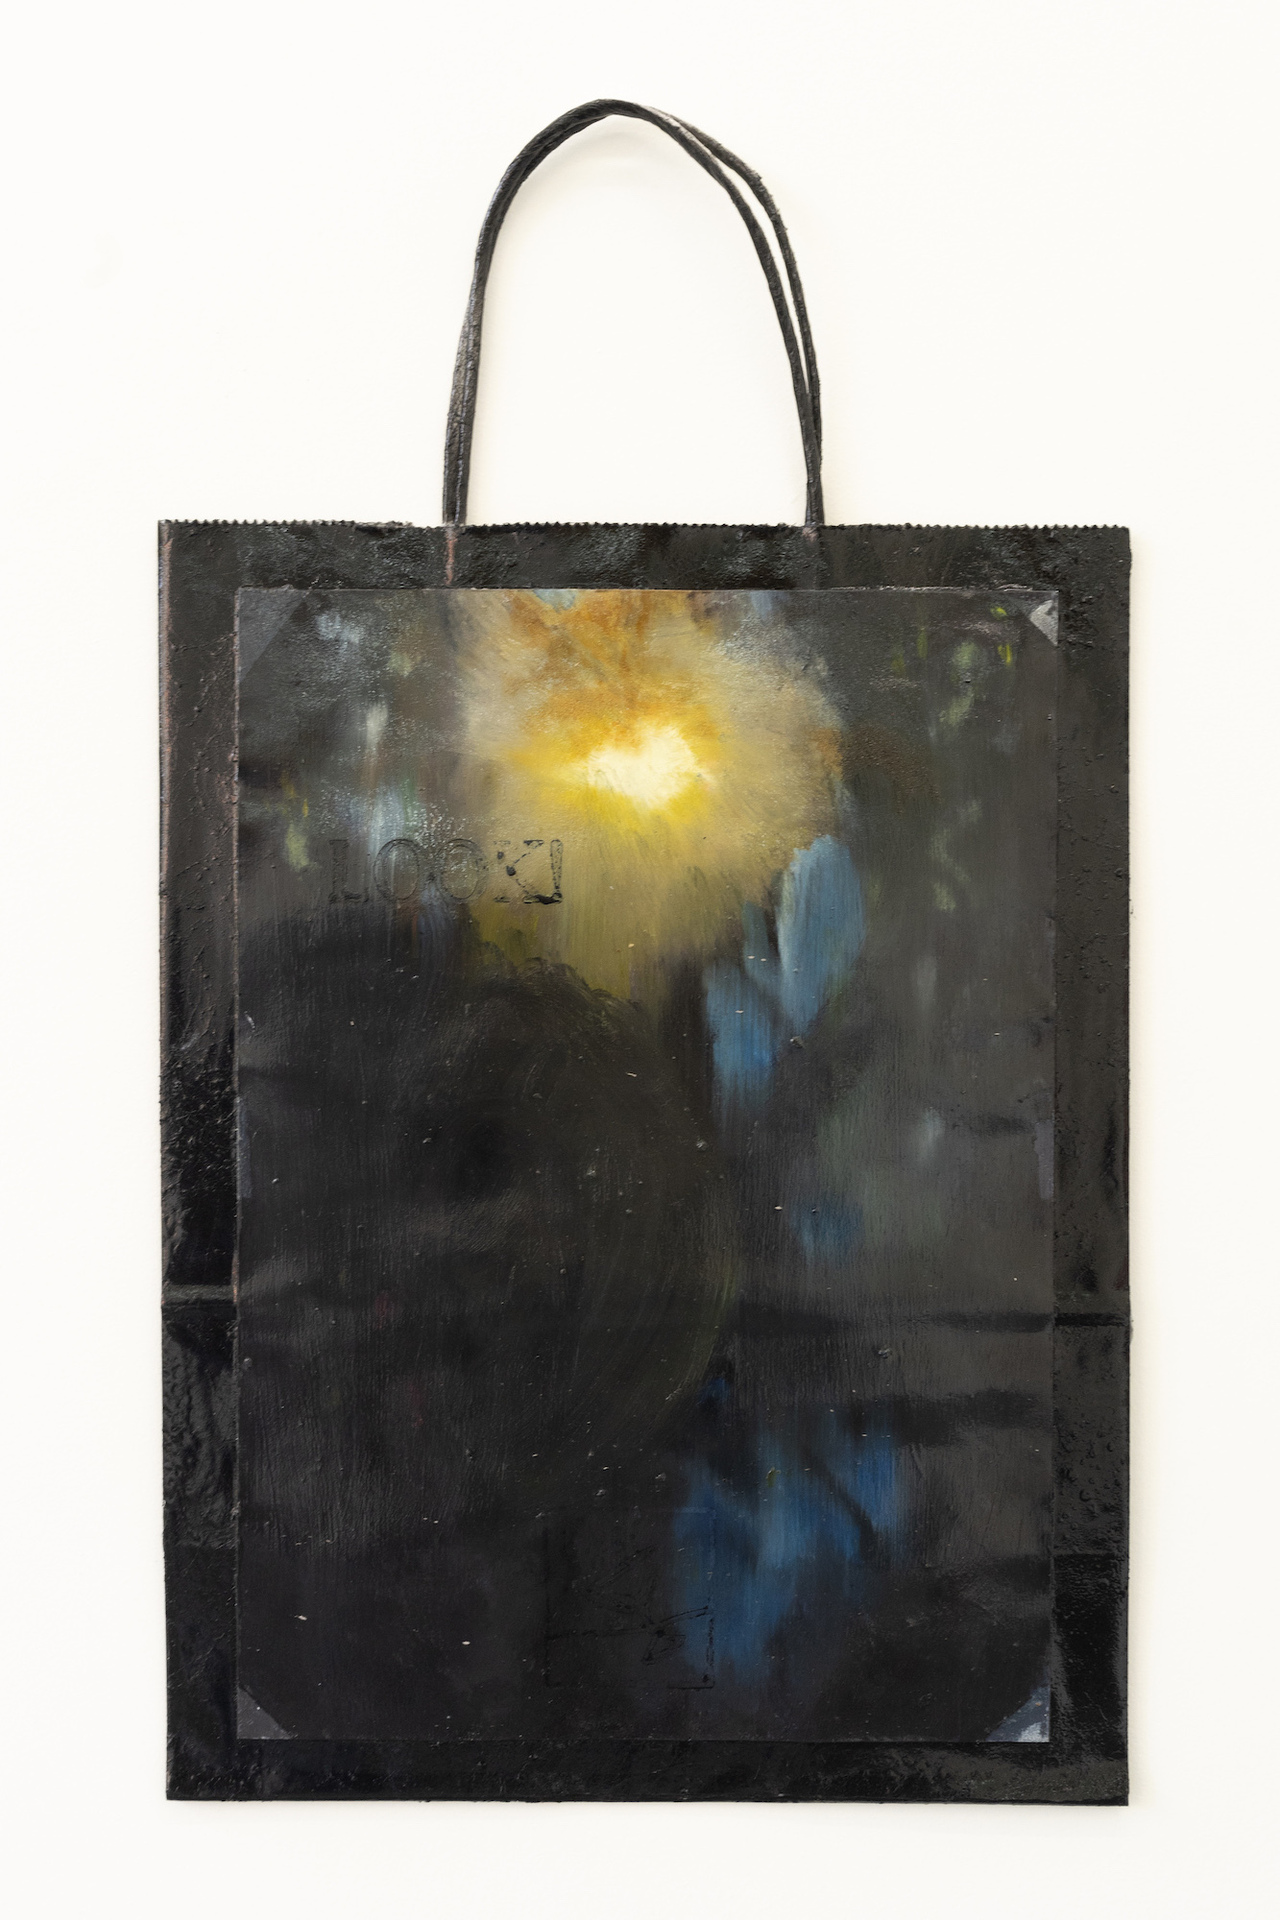 Nayan Patel, Neck craned back looking at the street lamp, 2021, indian ink, oil, acrylic, spray paint on shopping bag, 440 x 250mm